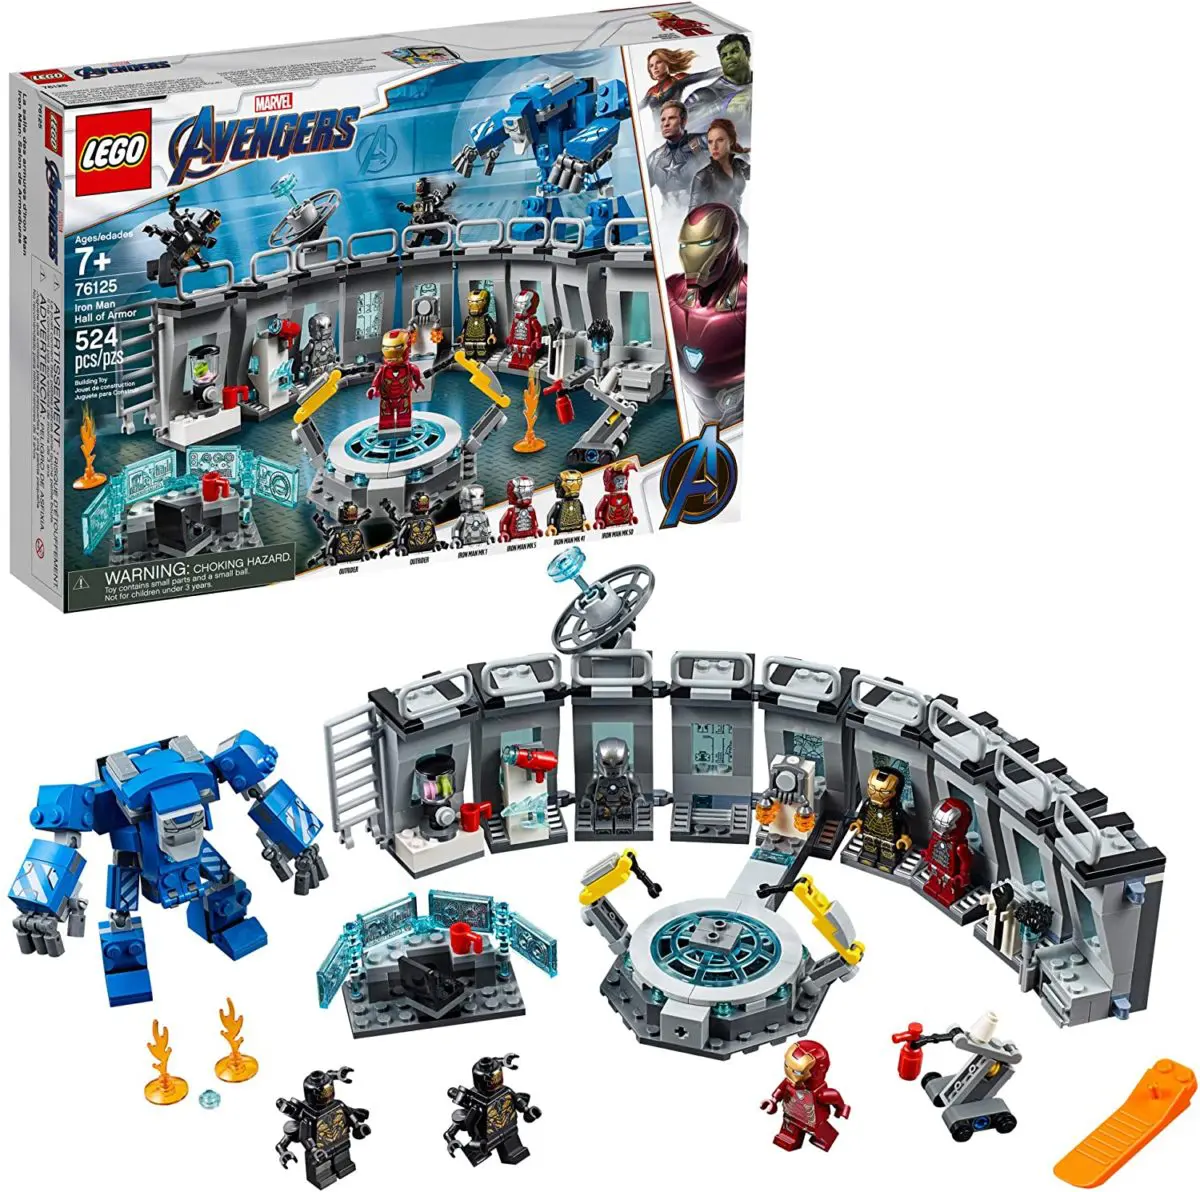 LEGO Marvel Avengers Iron Man Hall of Armor - Top Toys and Gifts for Eight Year Old Boys 1